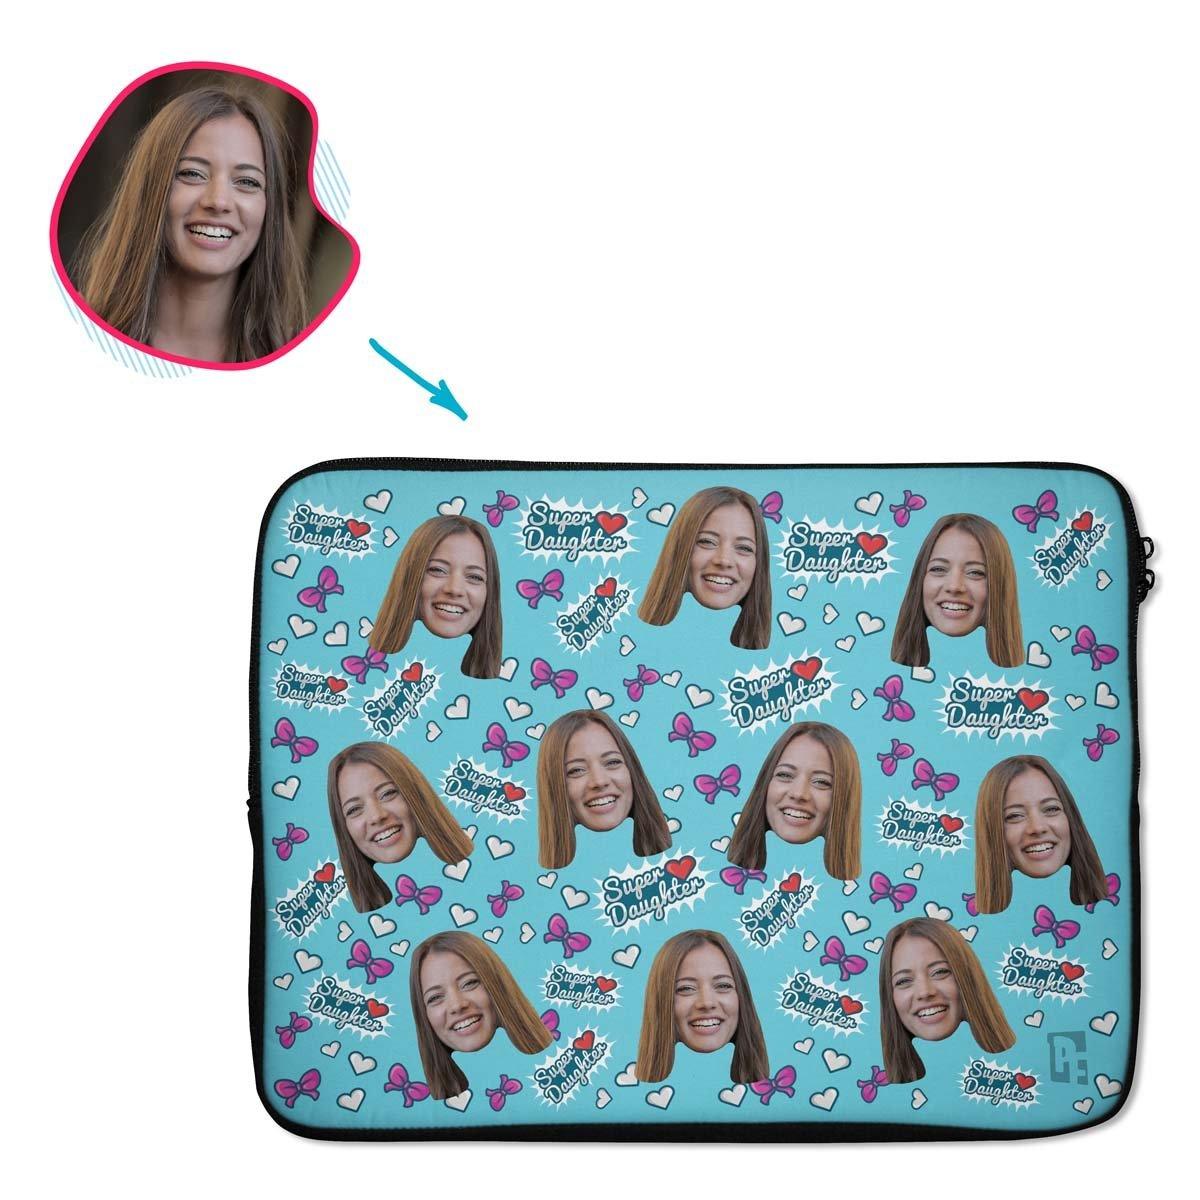 blue Super Daughter laptop sleeve personalized with photo of face printed on them